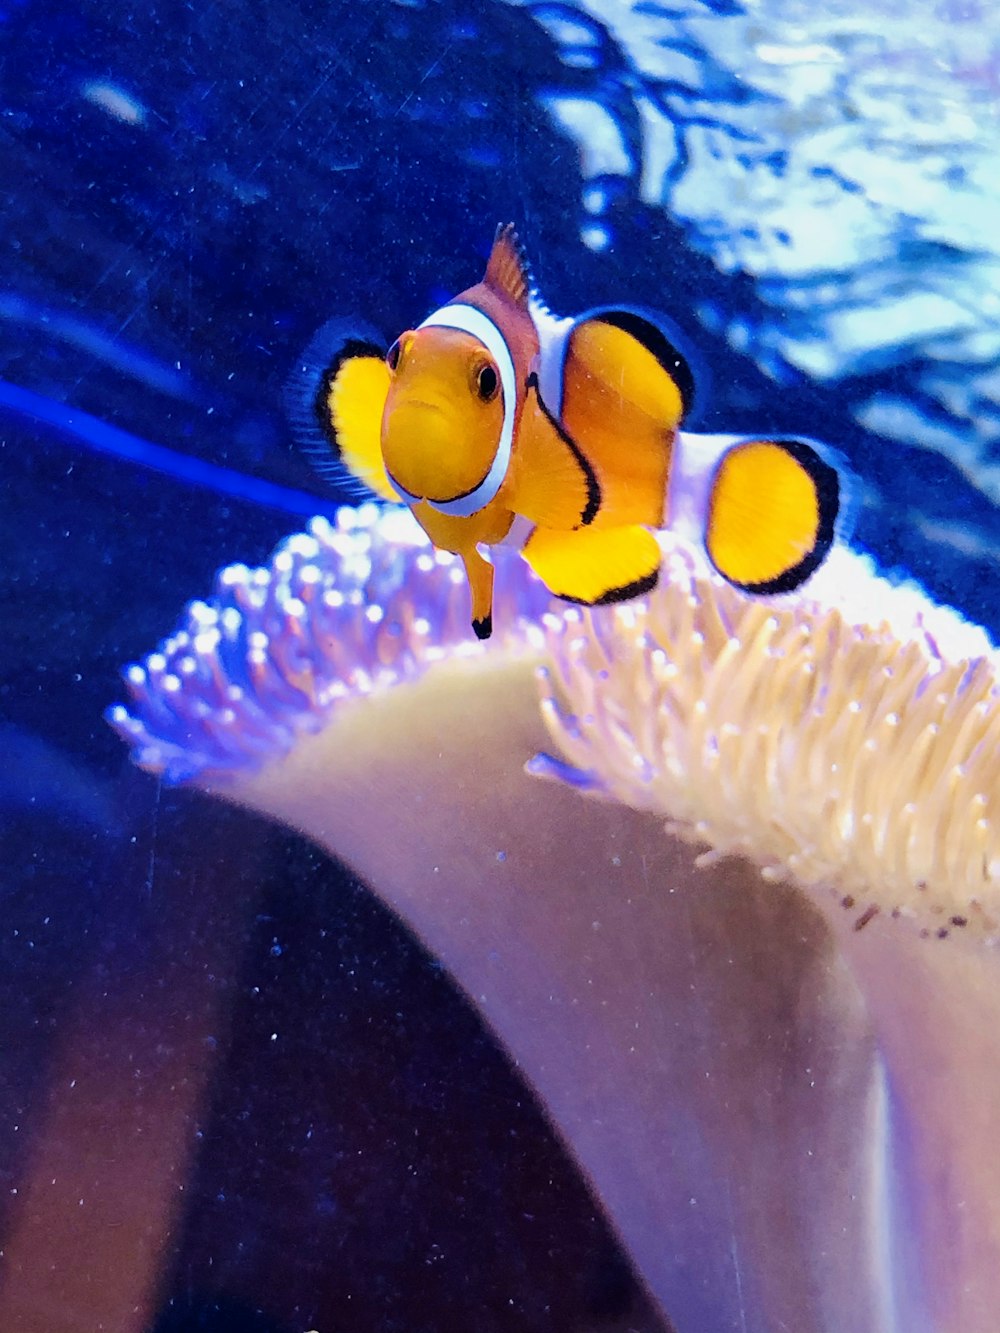 clown fish in water during daytime